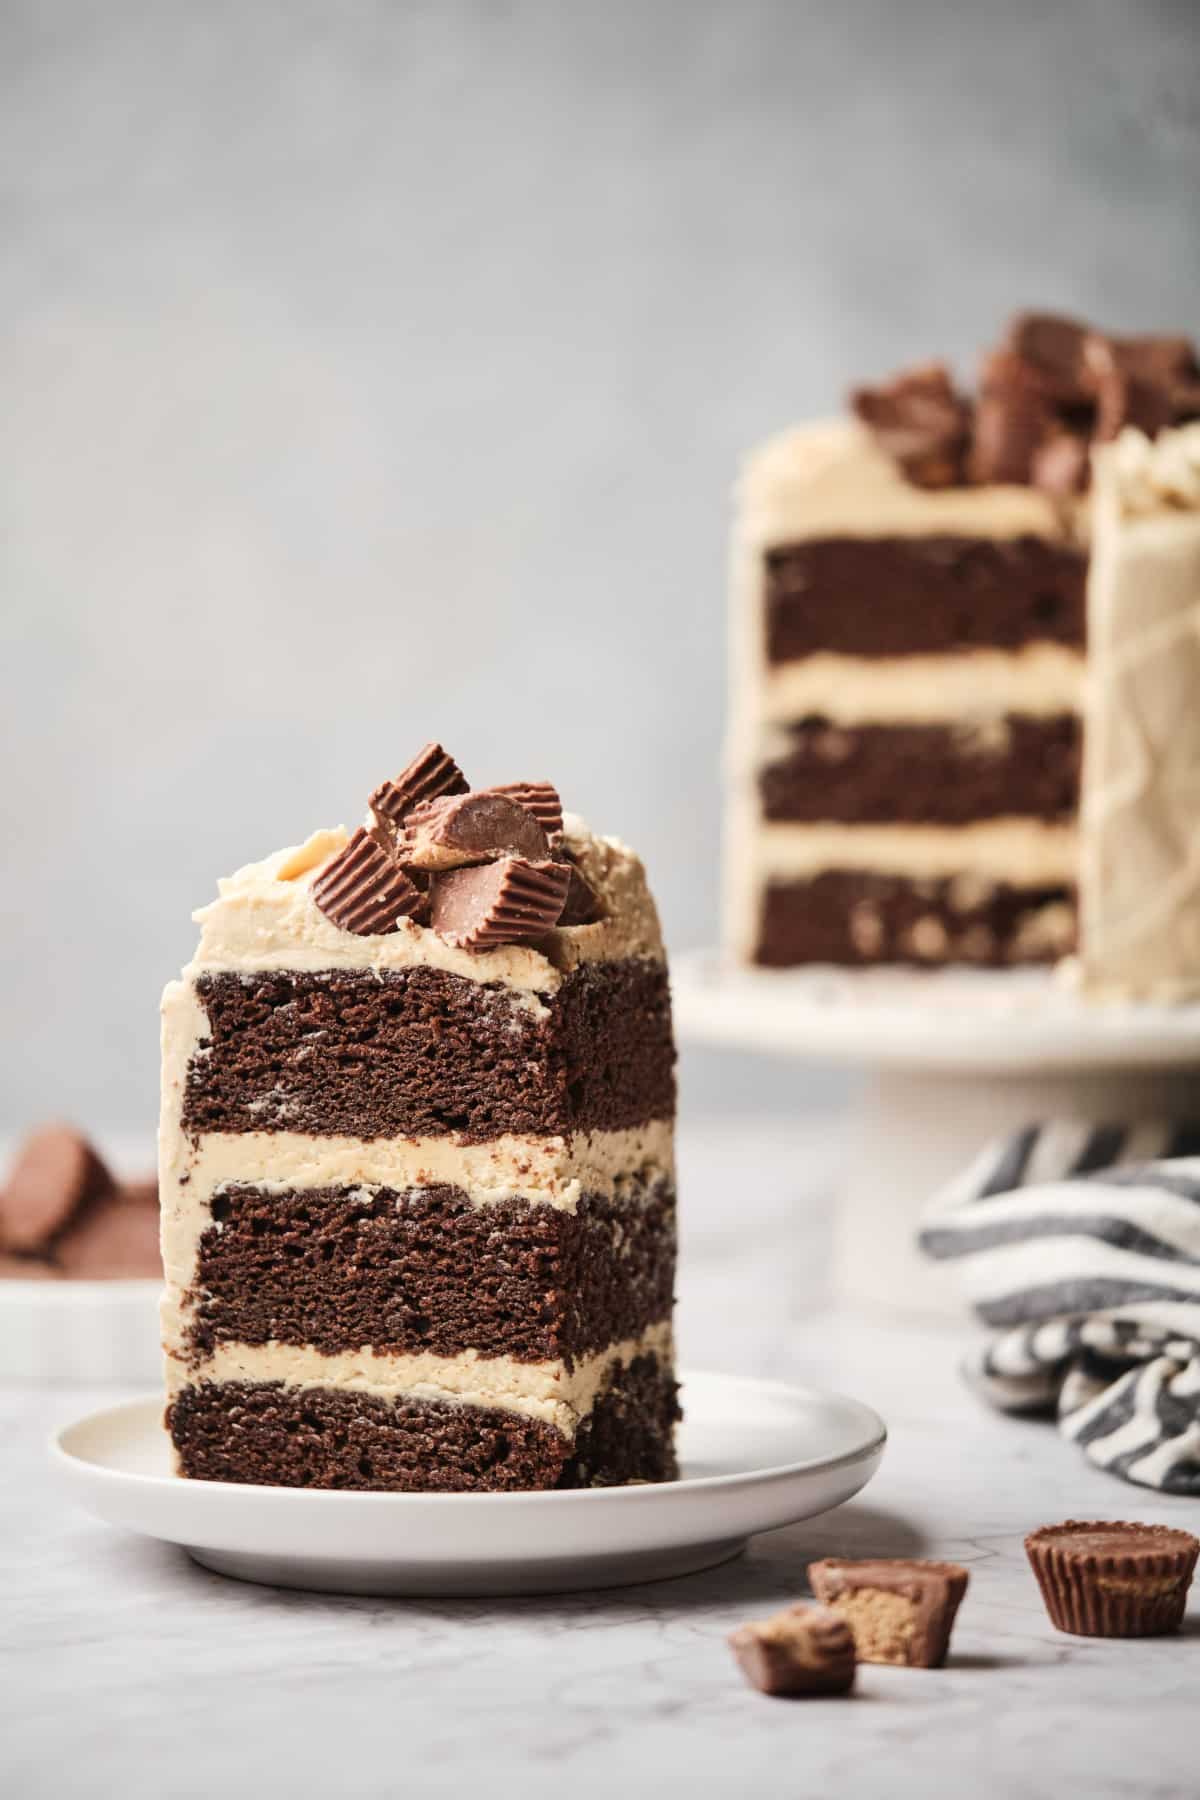 A slice of 3-layer chocolate cake with peanut butter frosting on a plate with the layer cake in the background.